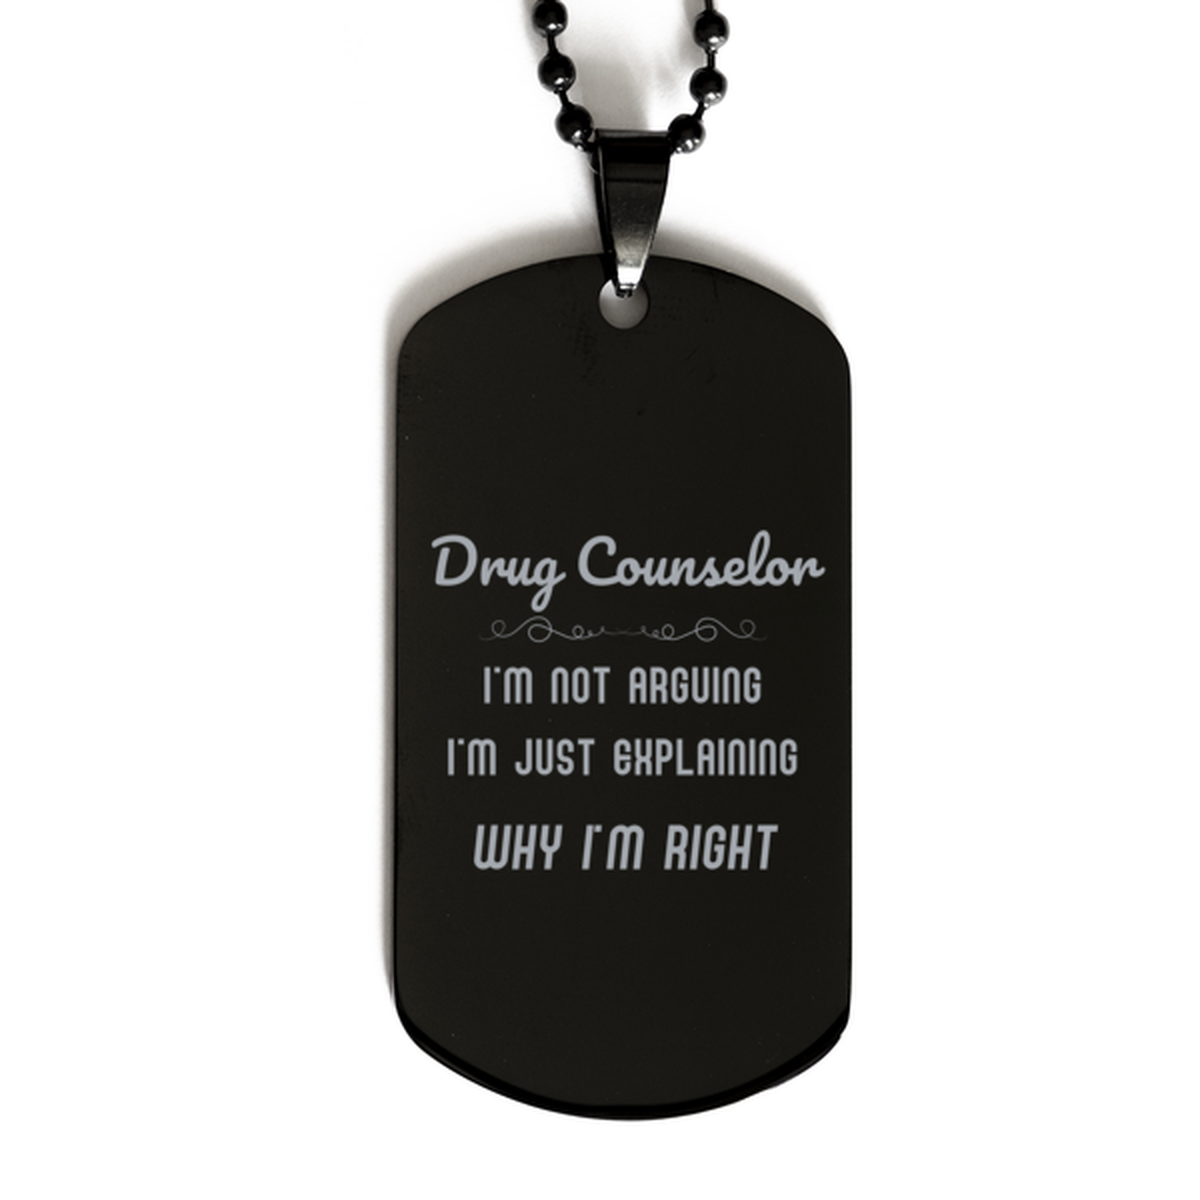 Drug Counselor I'm not Arguing. I'm Just Explaining Why I'm RIGHT Black Dog Tag, Funny Saying Quote Drug Counselor Gifts For Drug Counselor Graduation Birthday Christmas Gifts for Men Women Coworker